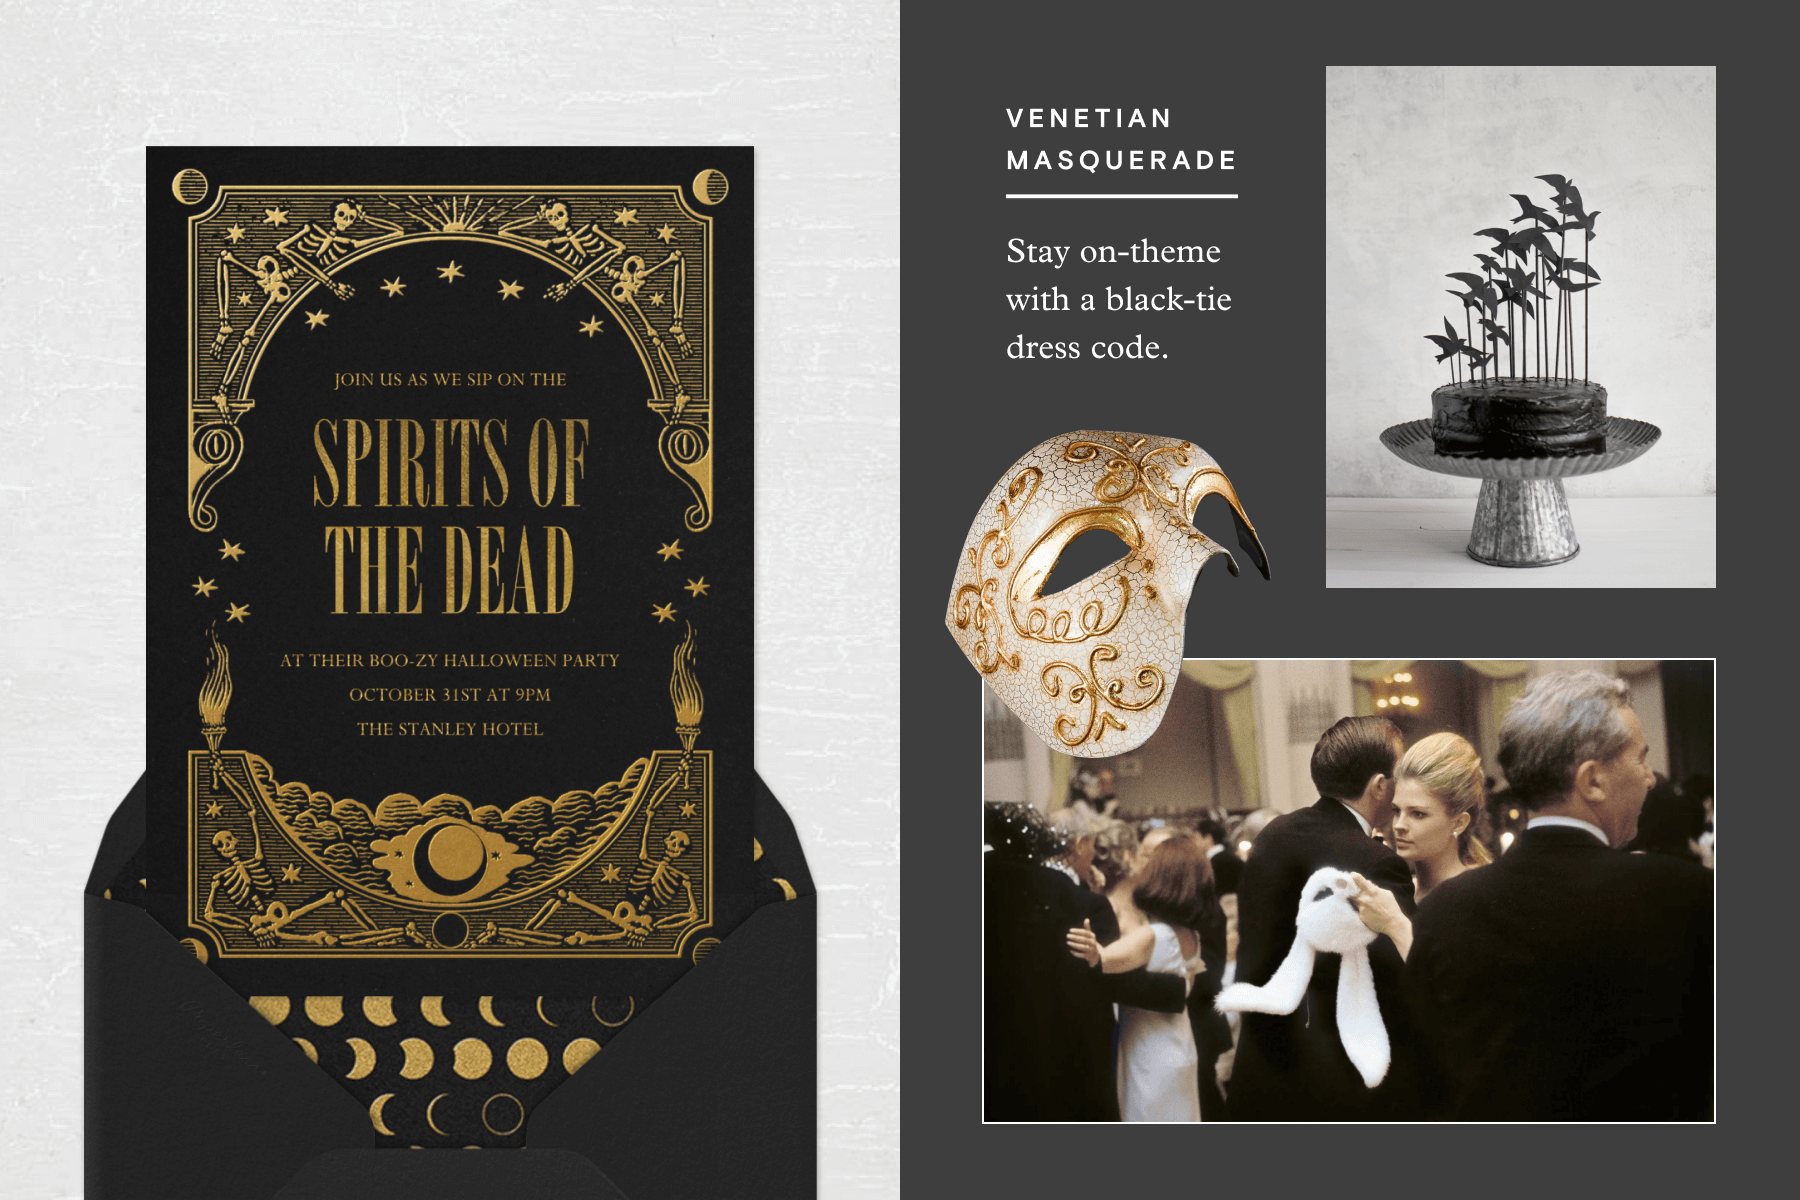 From Left: A black and gold Halloween invitation with a skeleton-motif frame, a white-and-gold Venetian mask, a black cake with black bird cake toppers and a silver stand, A vintage photograph of two people dancing in a crowded masquerade ball. The woman is holdin a white rabbit mask.